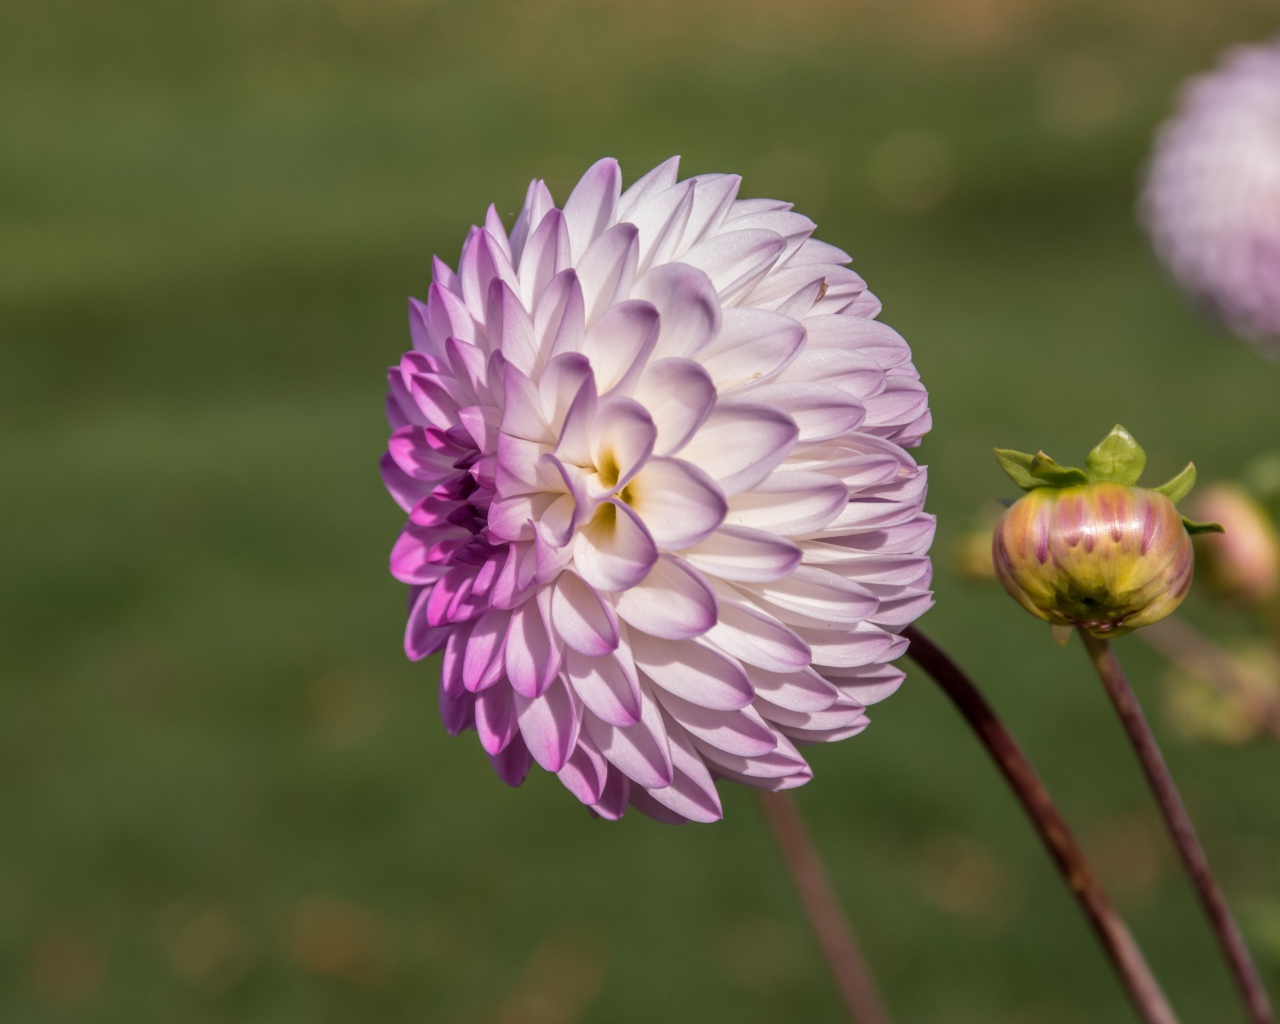 Purple dahlia flower with a bud on a flower bed